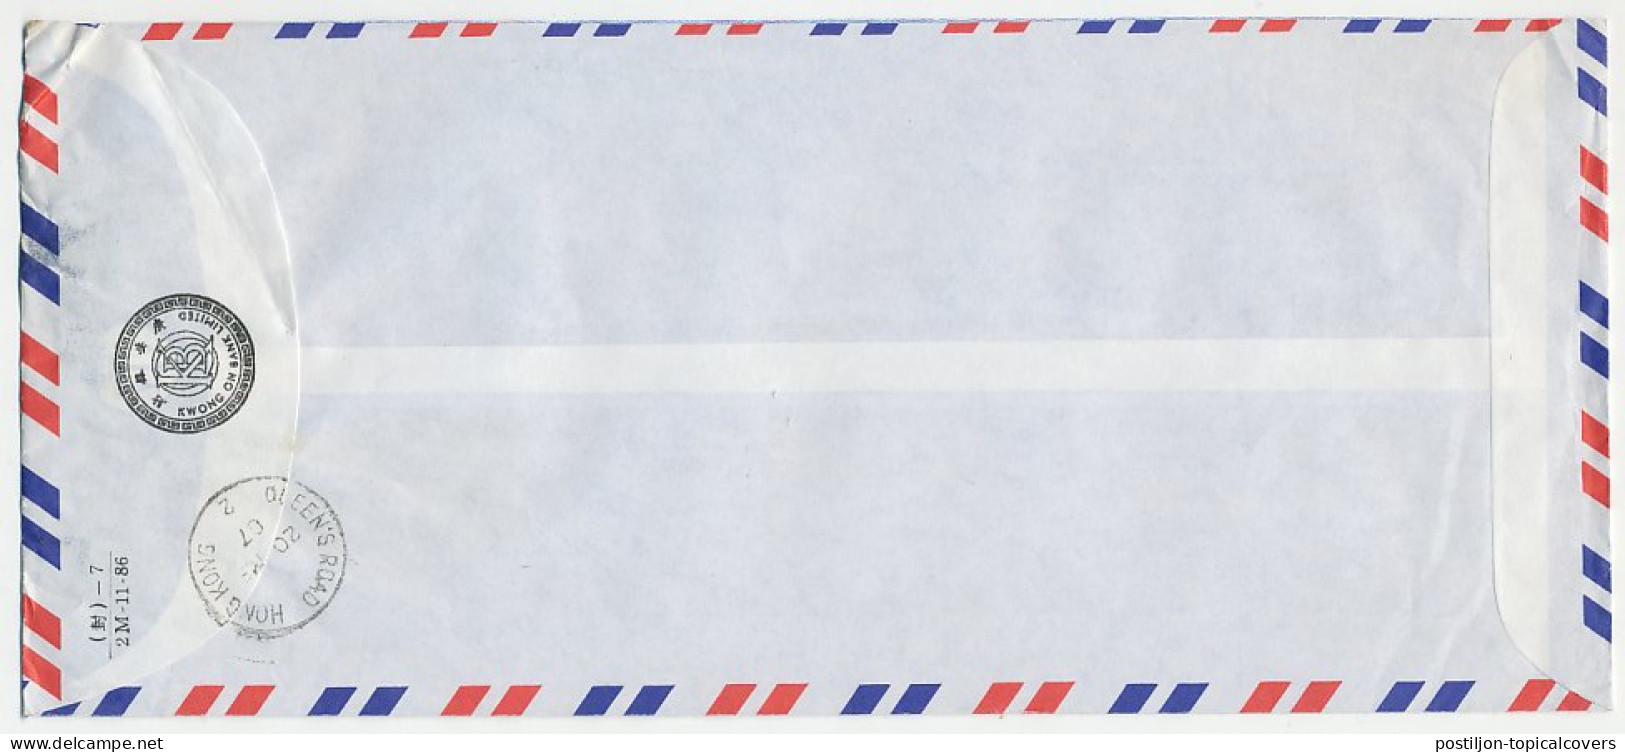 Registered Damaged Mail Cover Hong Kong - Netherlands 1987 Received Damaged - Officially Sealed - Label / Tape - Sin Clasificación